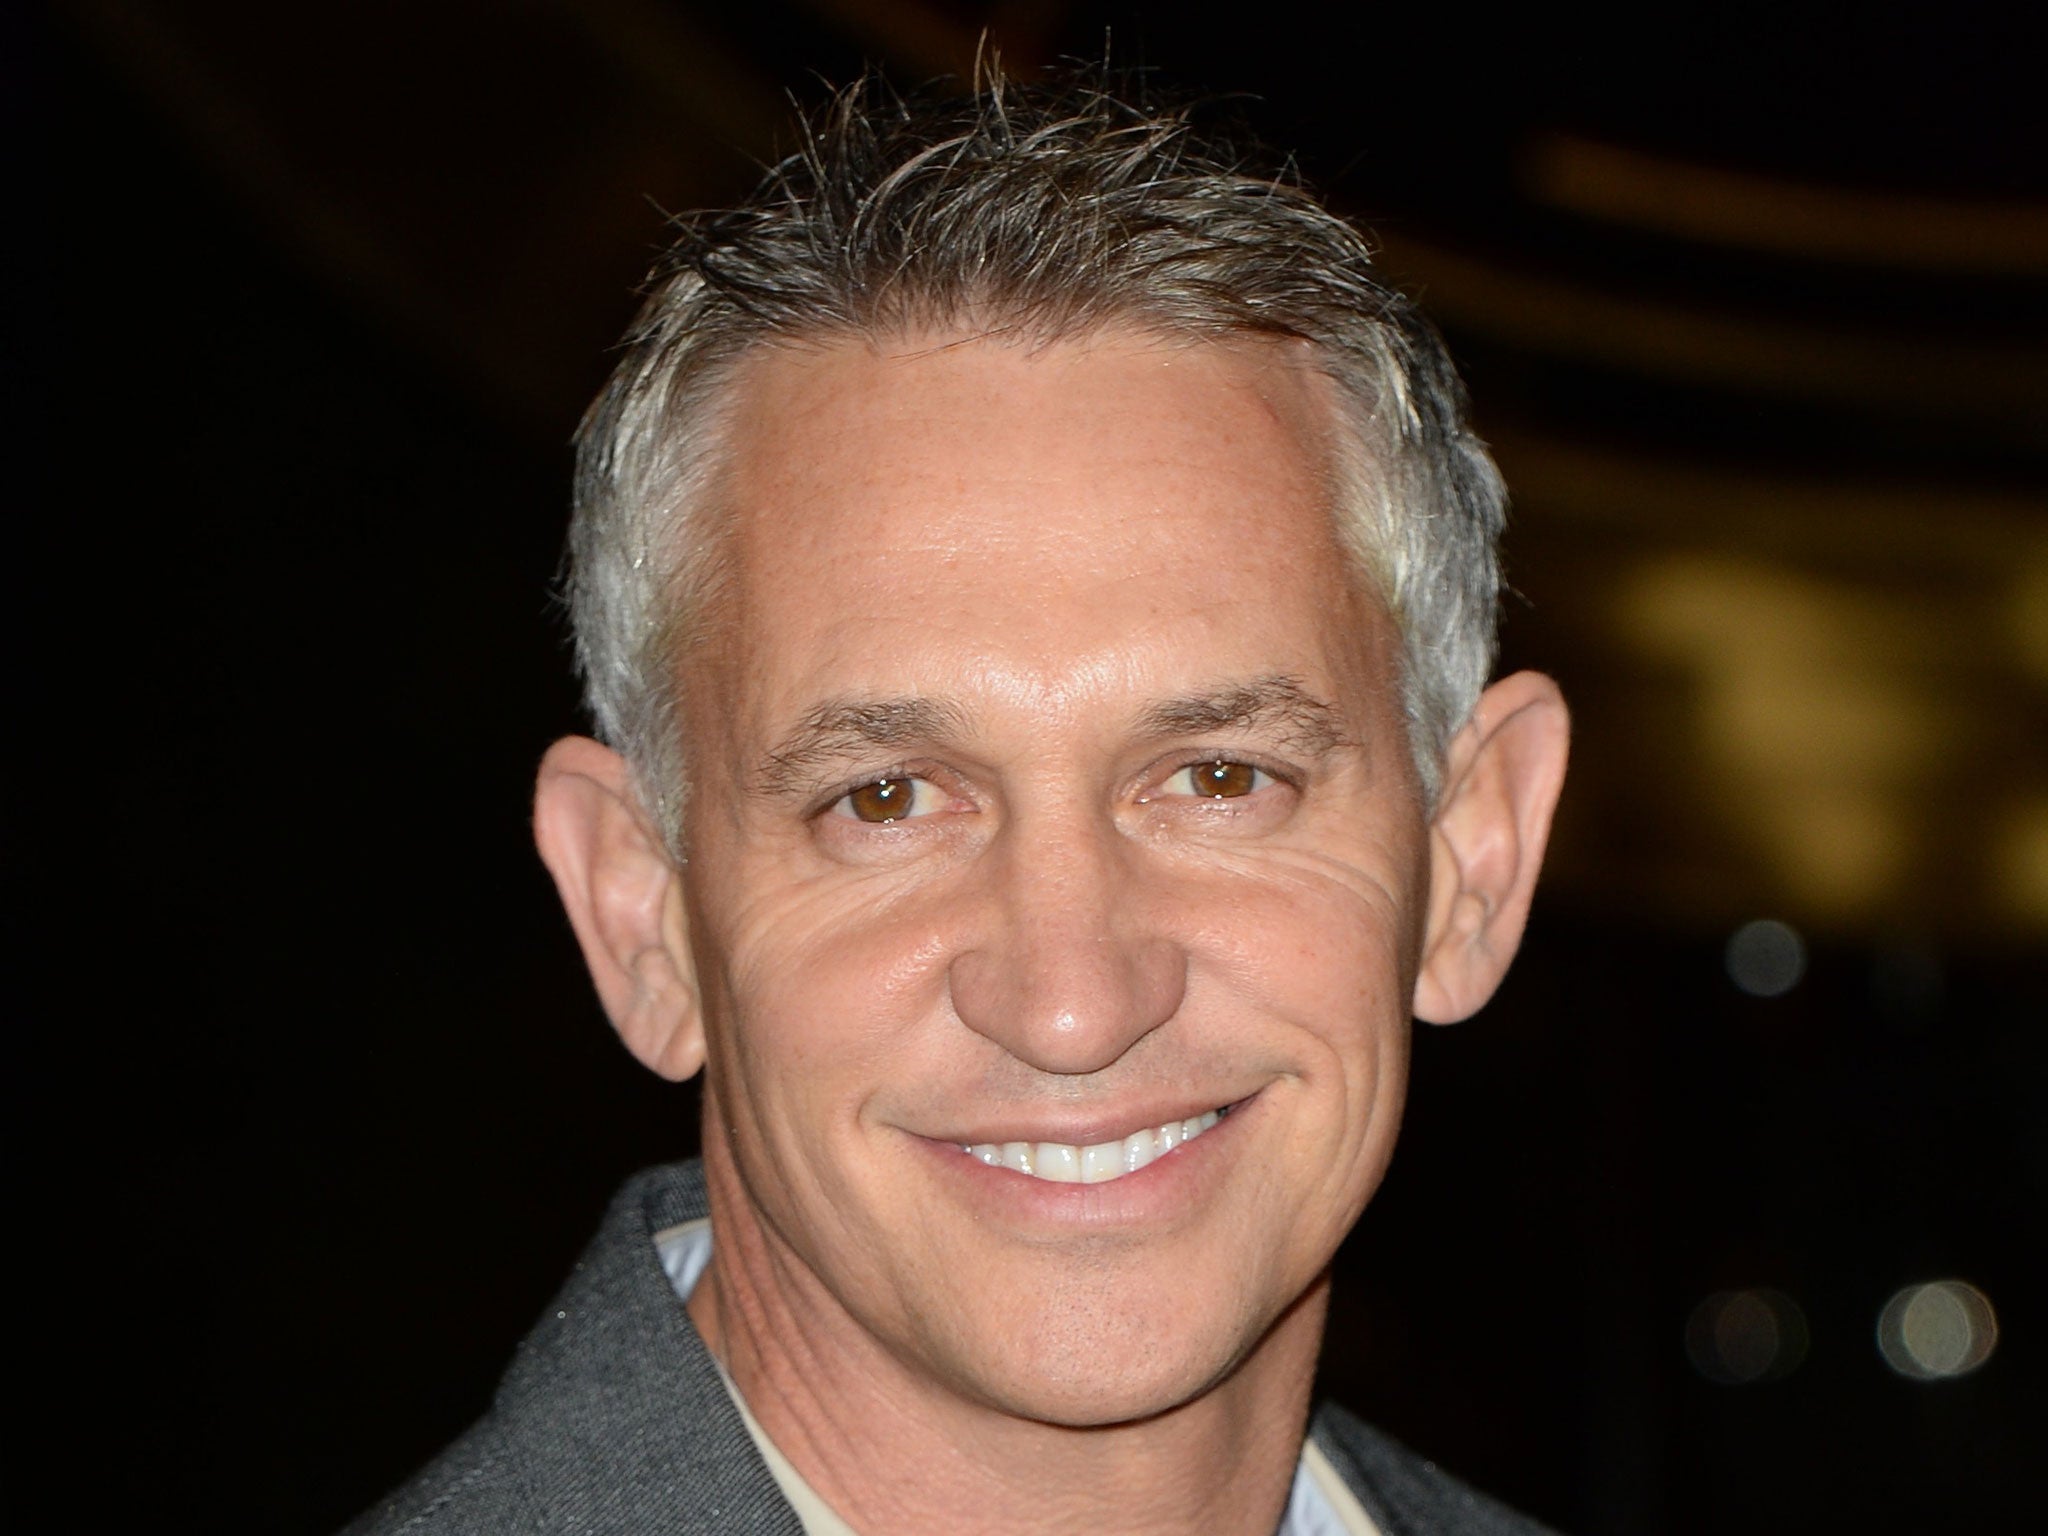 Gary Lineker at the UK Premiere of 'The Hunger Games: Catching Fire'